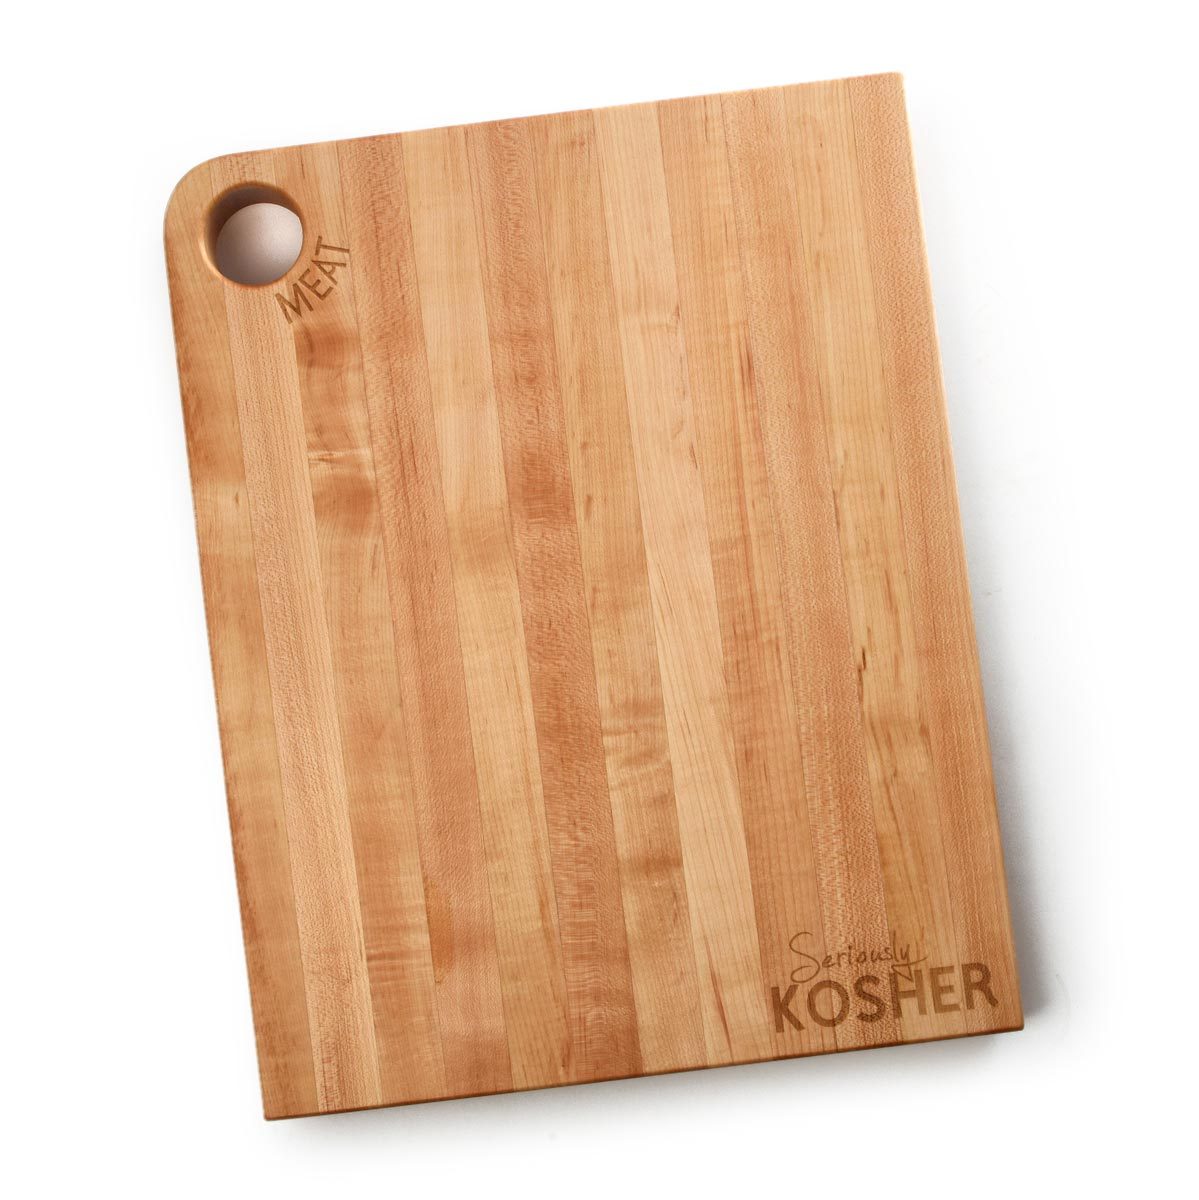 Seriously Kosher ~ Large Cutting Board ~ Meat